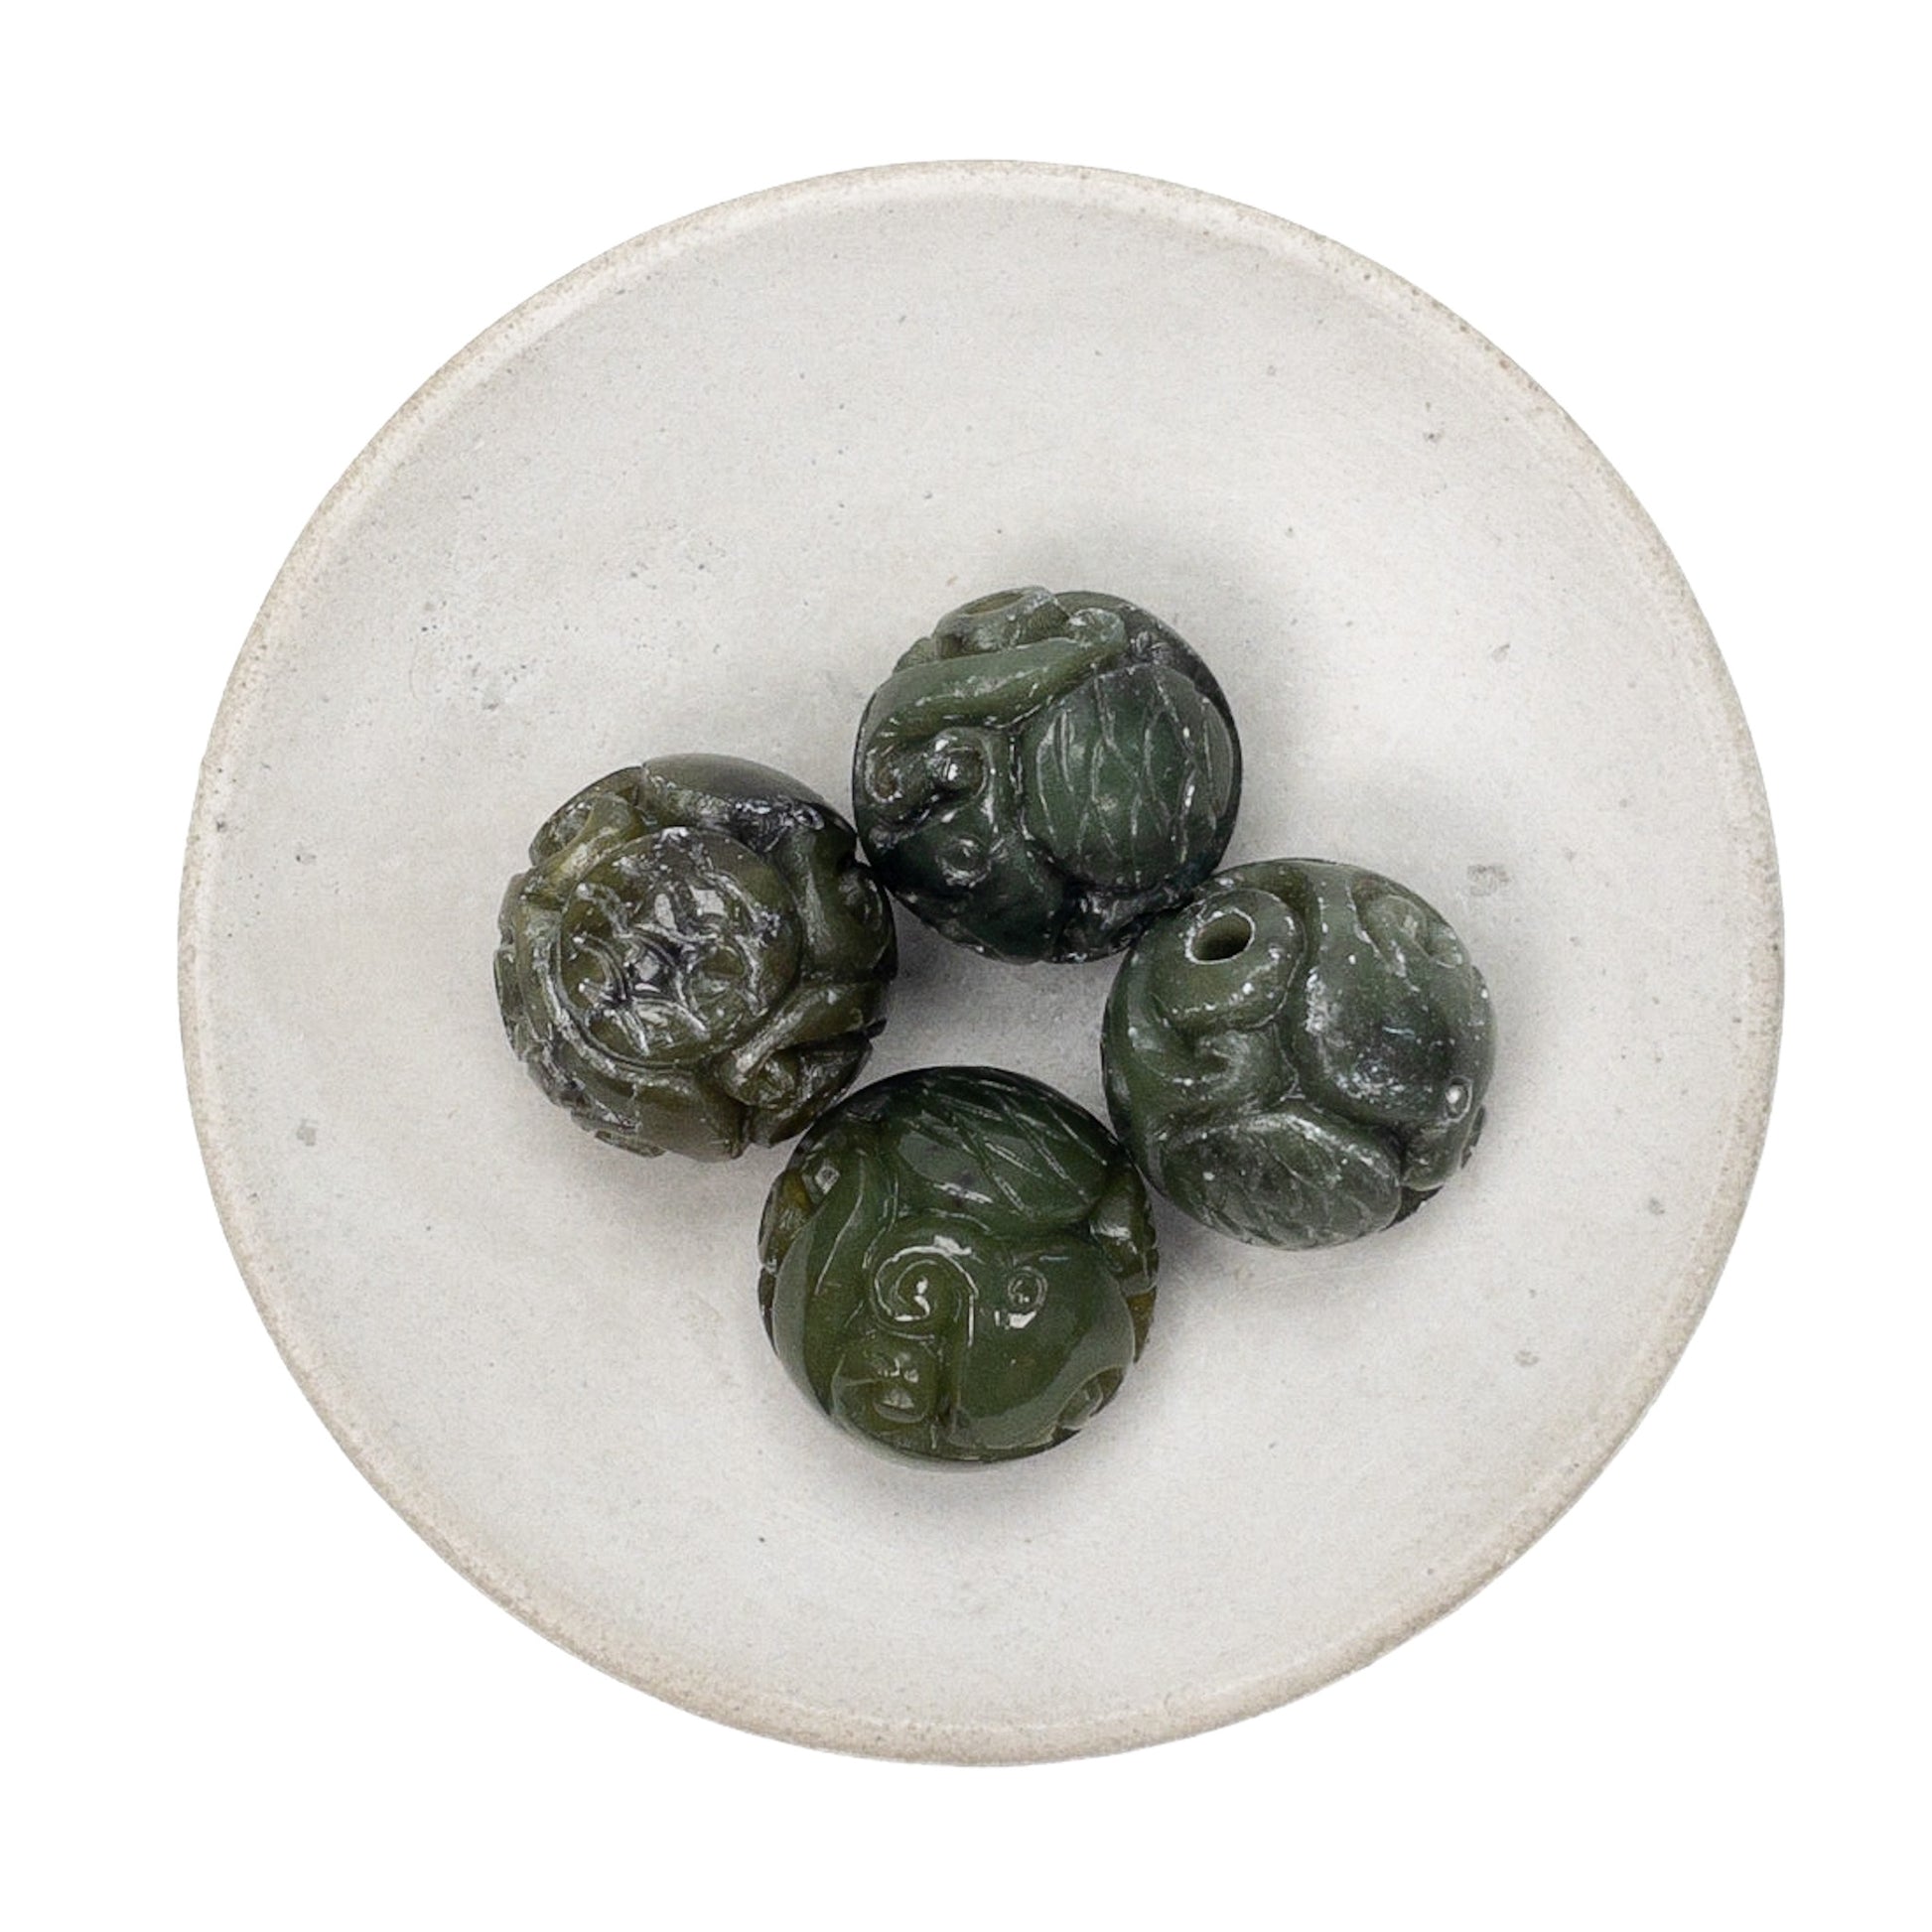 Canadian Jade 16mm Carved Round Bead - 1 pc.